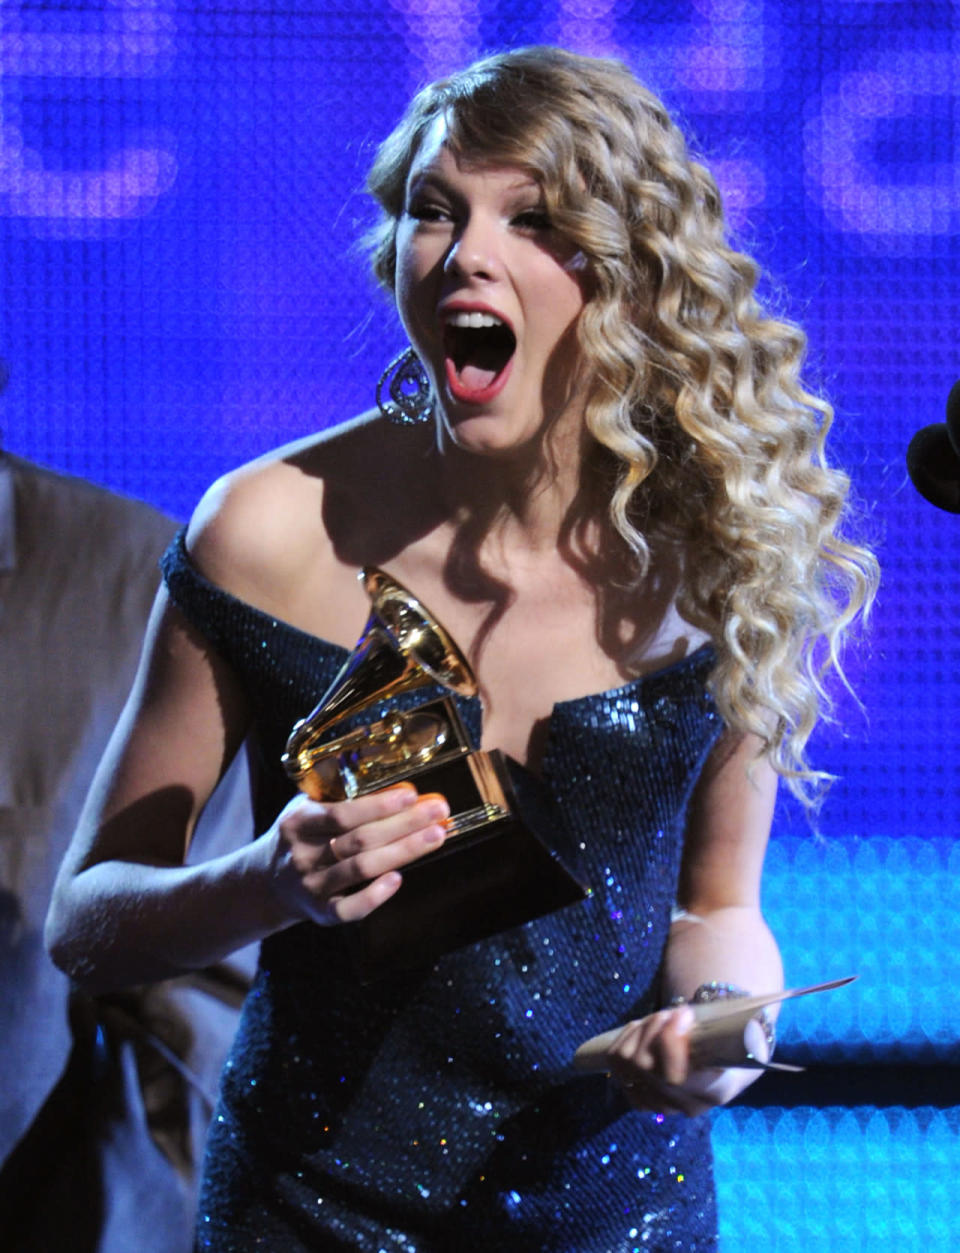 Taylor Swift lost the 2007 Best New Artist award to the talented but troubled Amy Winehouse. The country/pop superstar came back two years later to win Album of the Year for her sophomore album, Fearless.